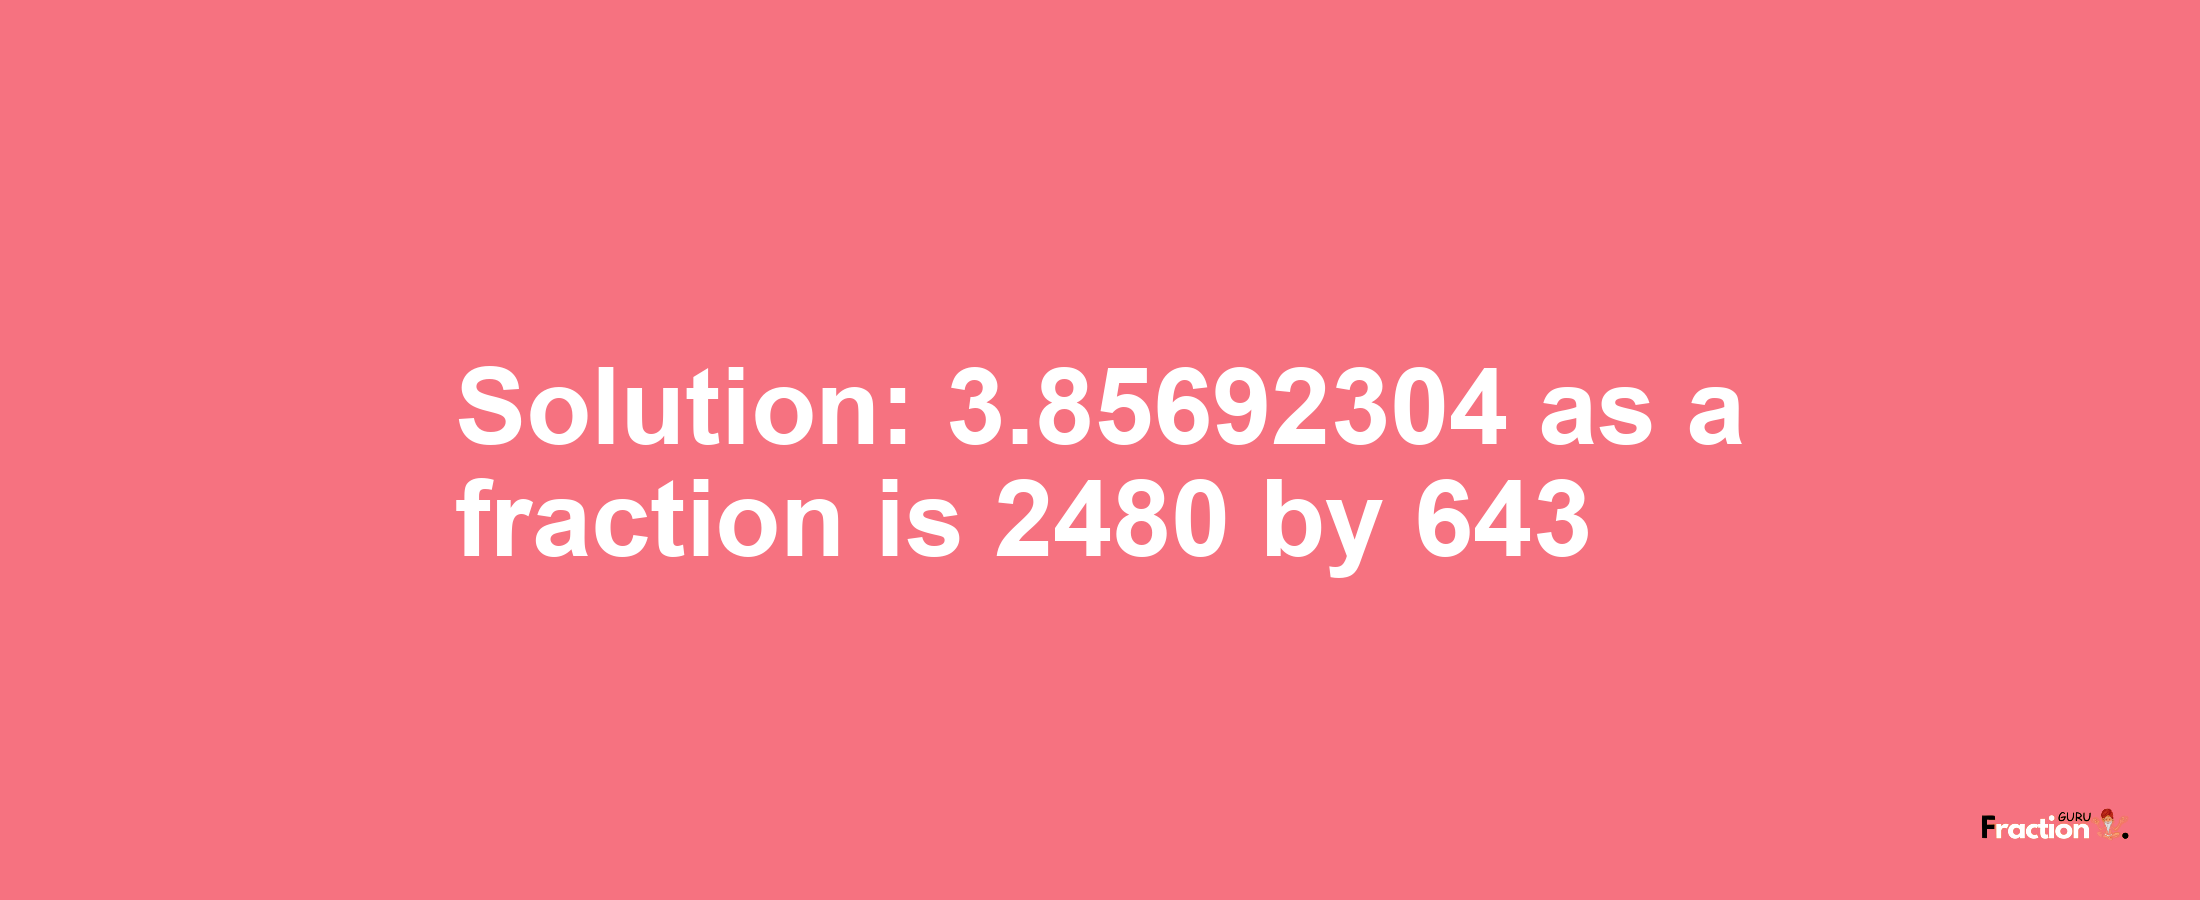 Solution:3.85692304 as a fraction is 2480/643